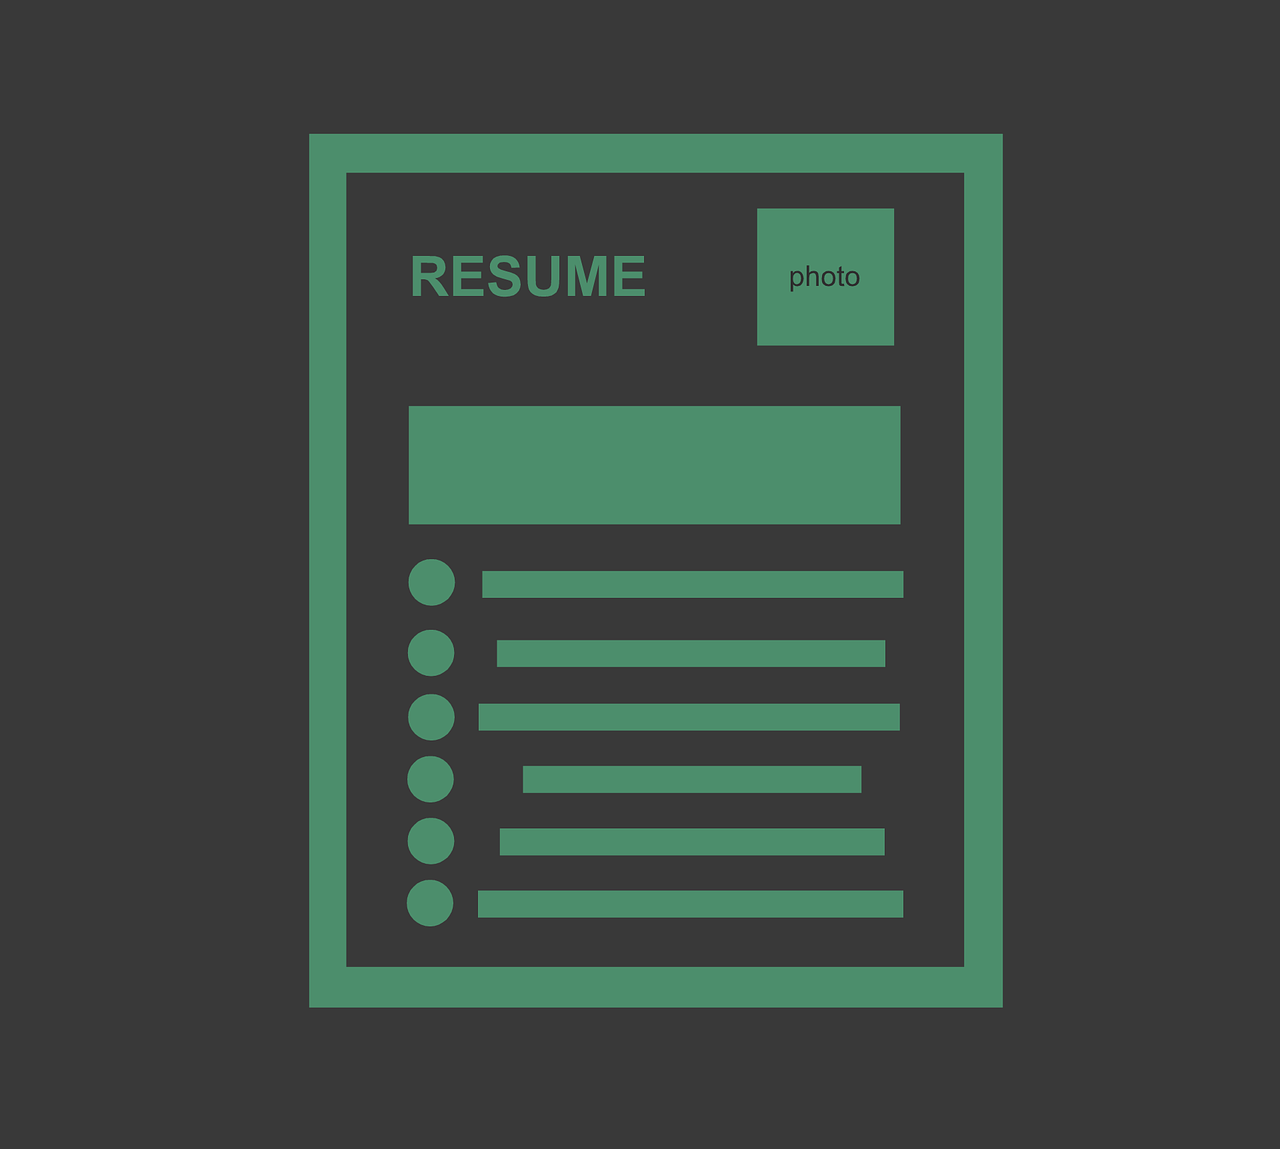 Black background with the outline of the resume in green box with lines.